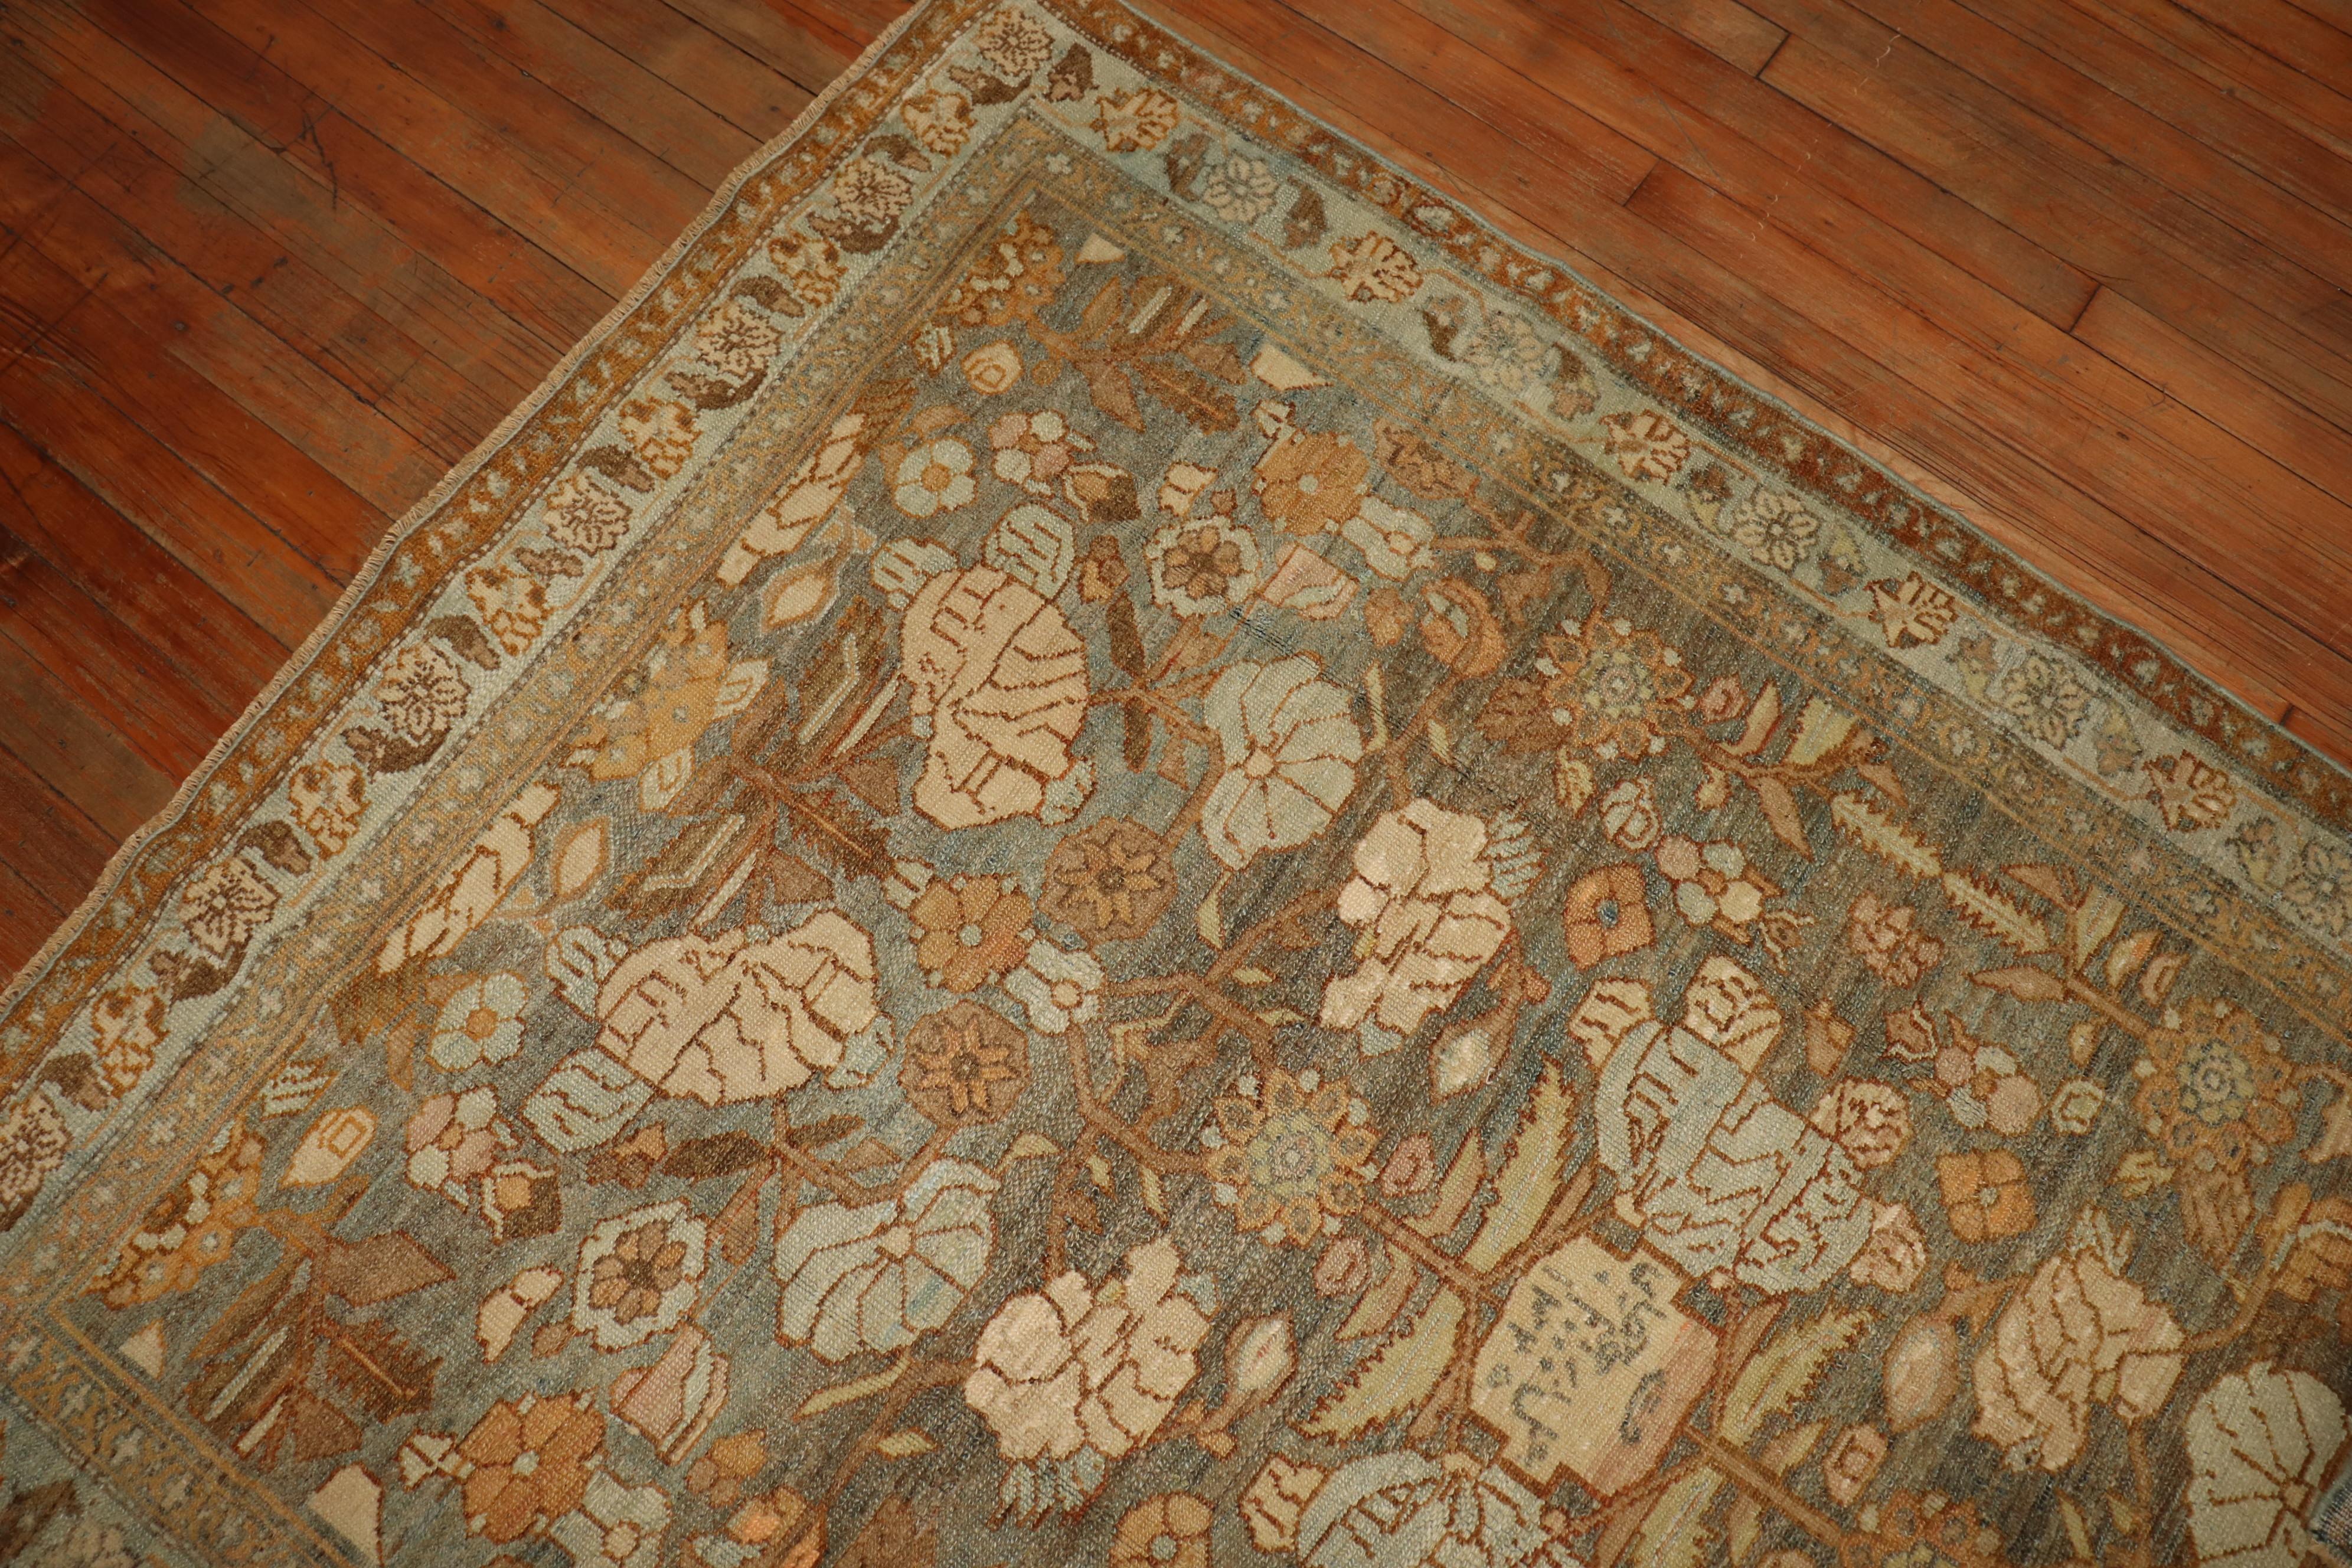 An accent size early 20th century Persian Malayer rug.

Measures: 4'6 x 6'6